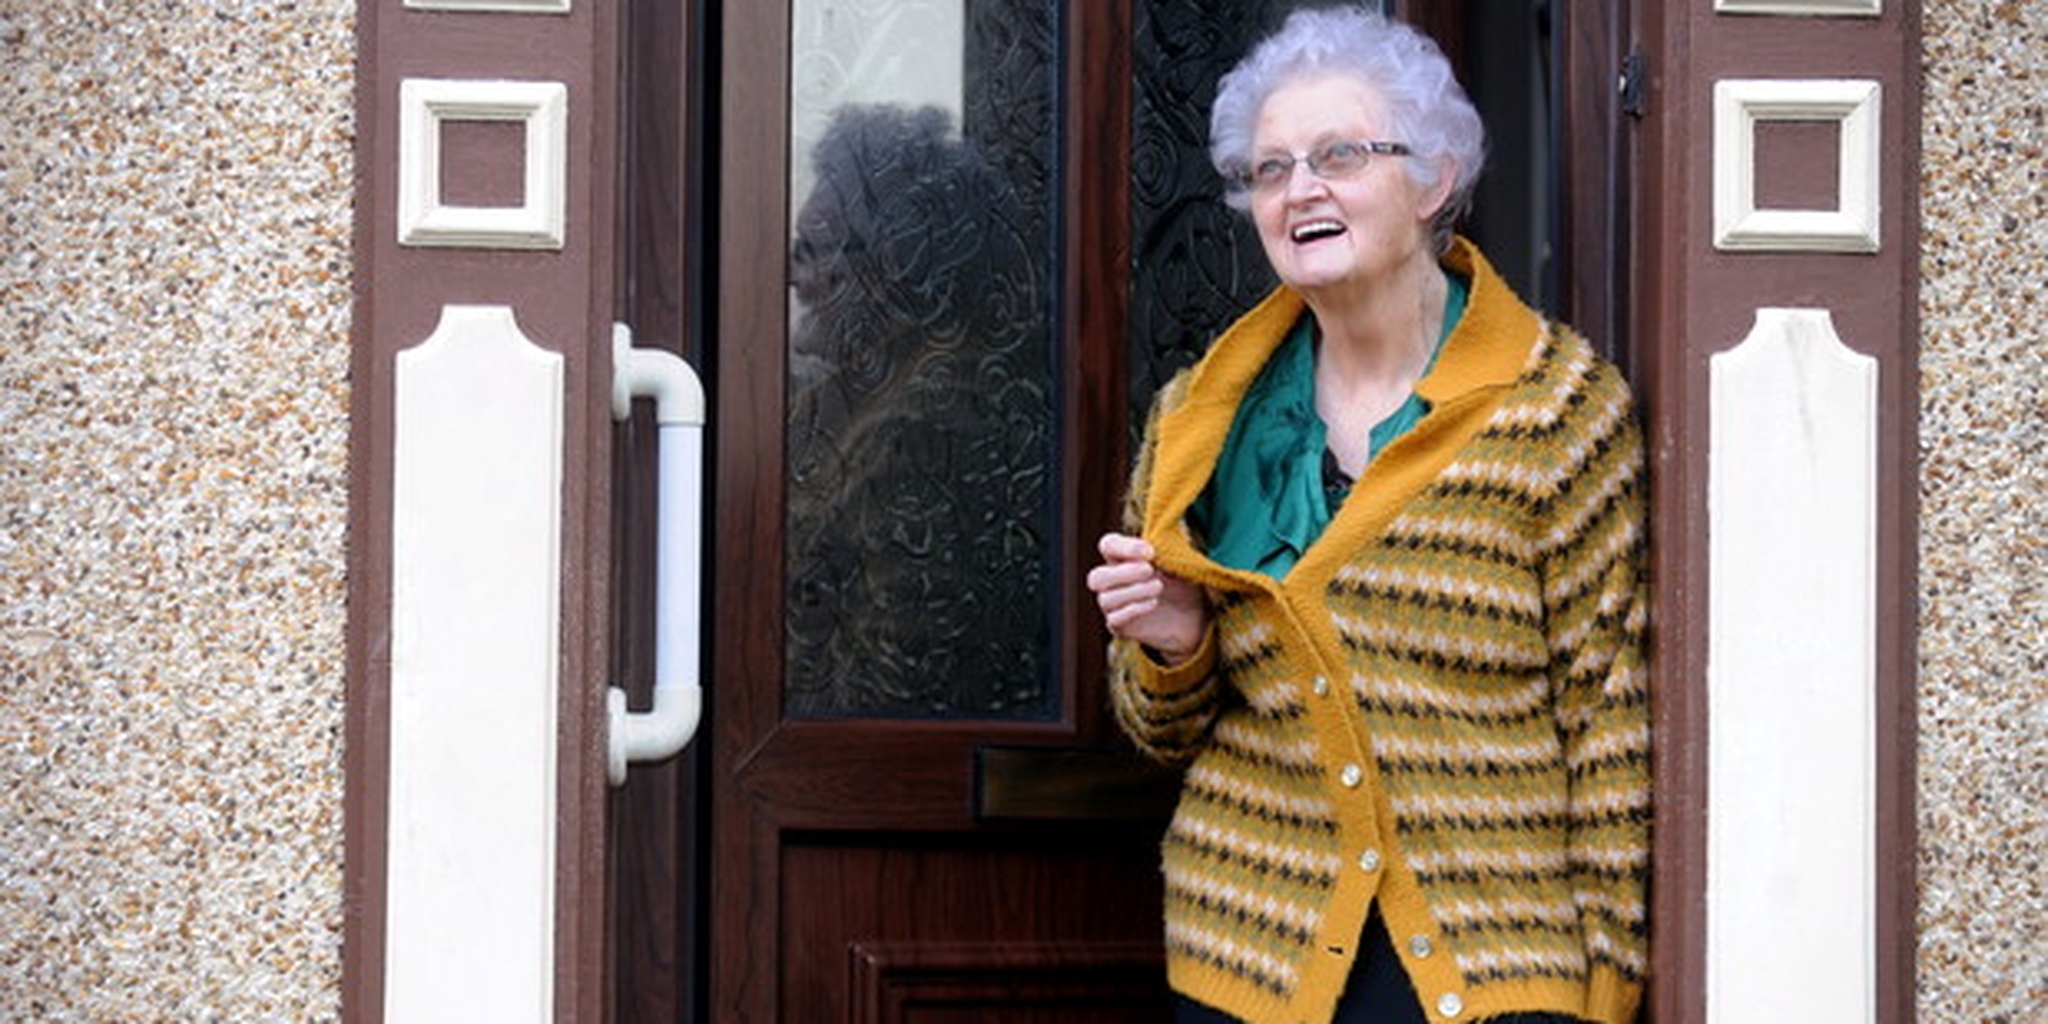 A woman with a 54-year-old cardigan is the biggest star in local news